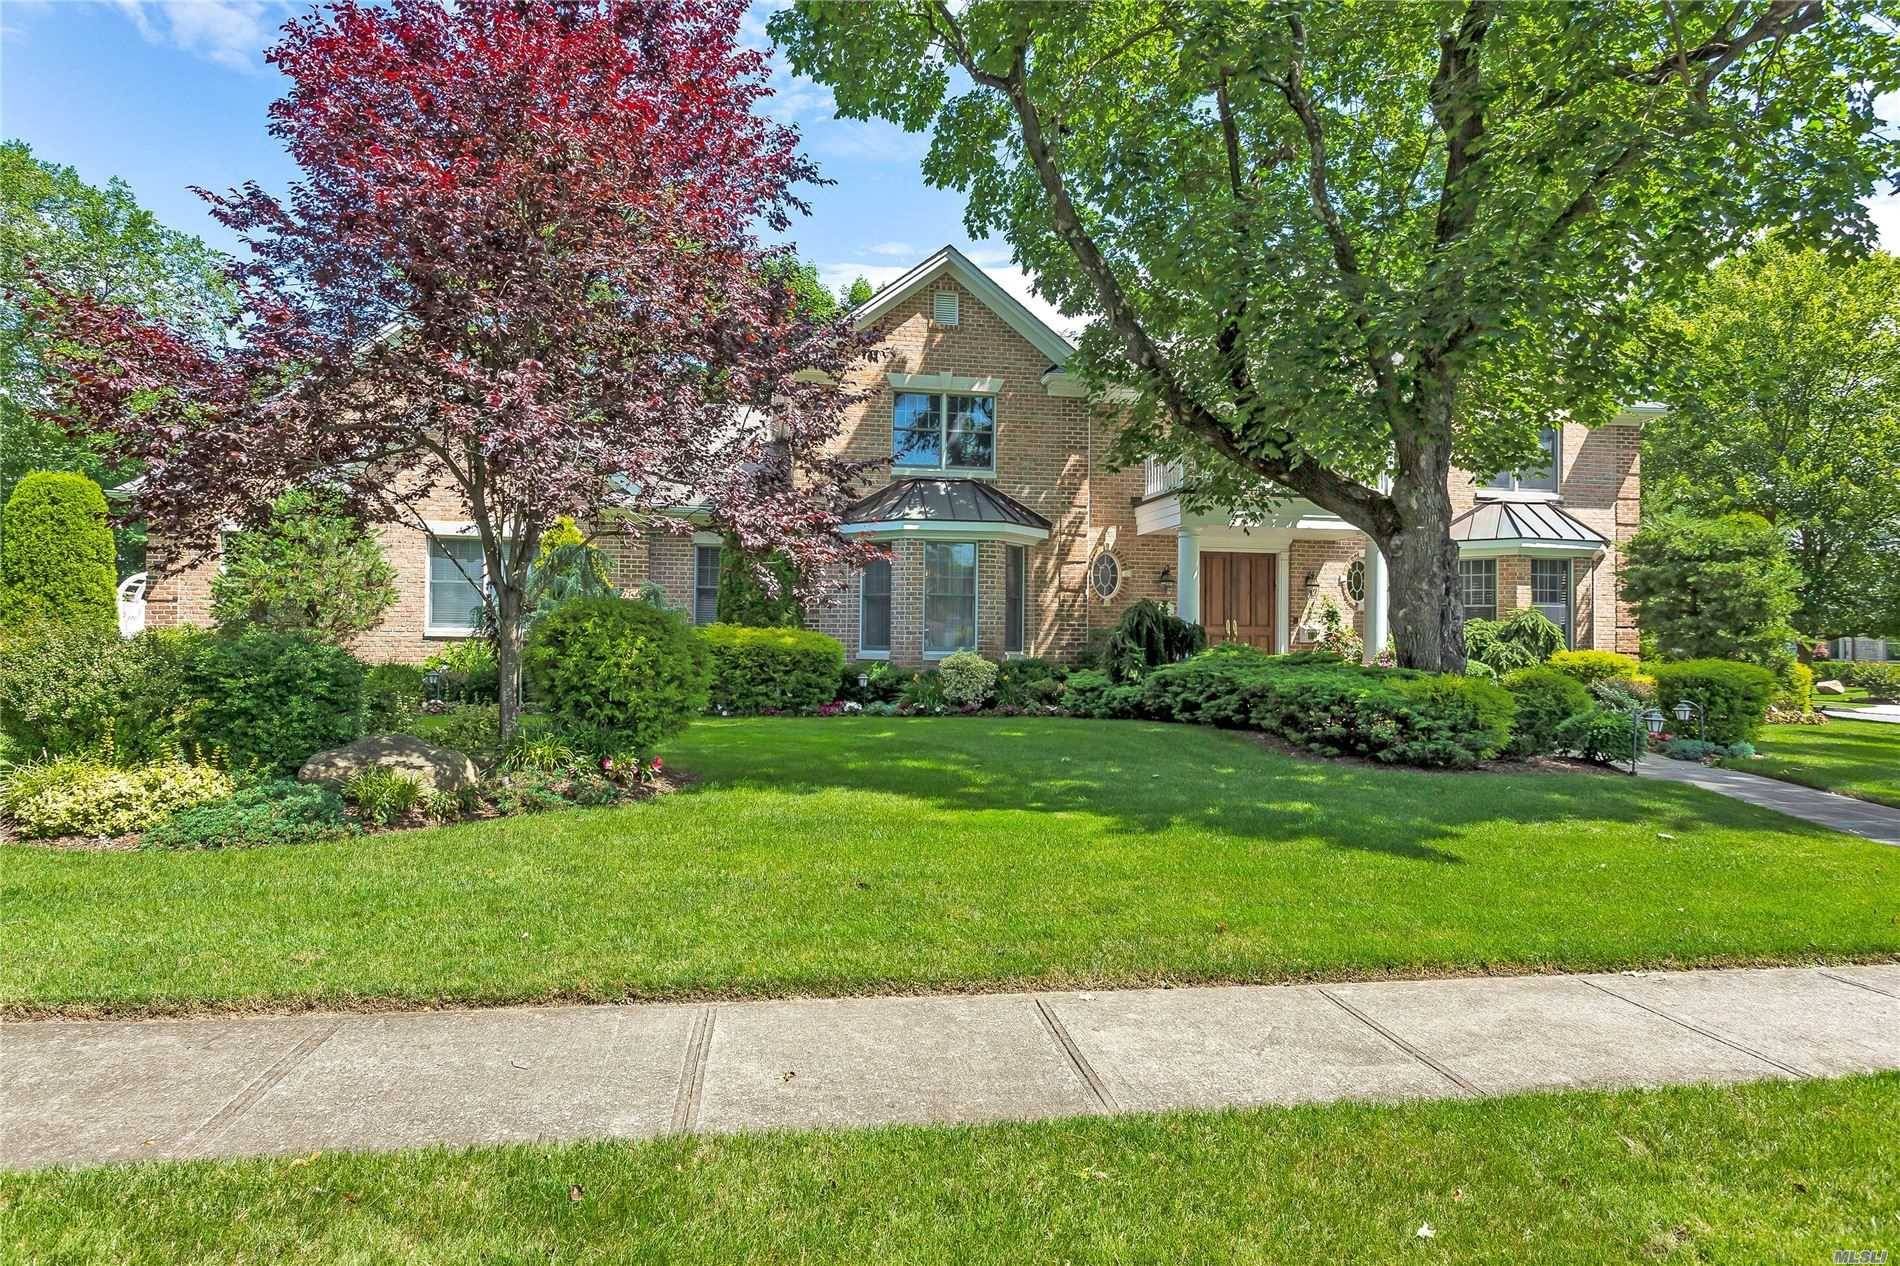 Roslyn Heights. Beautiful and Regal Brick Colonial On a Corner Lot In Roslyn Heights Country Club.